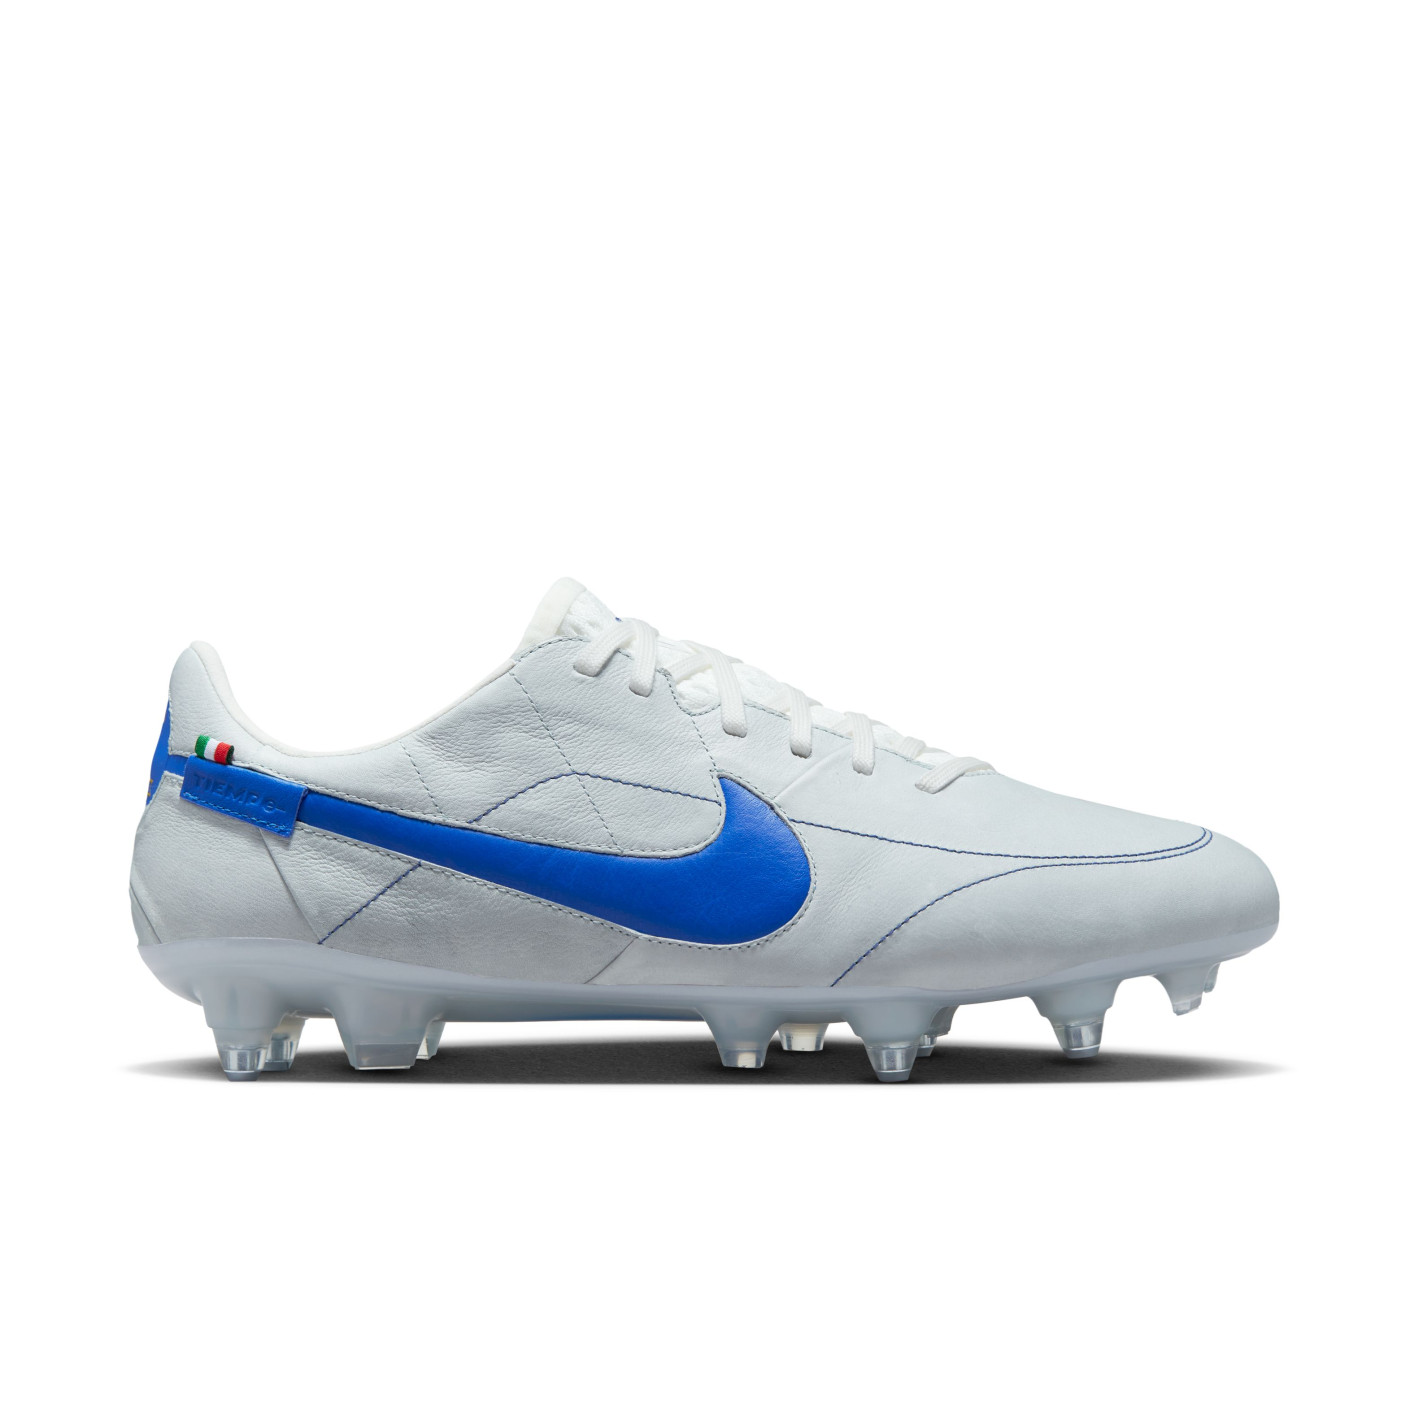 Legend Elite 9 Made in Italy Iron-stud Football Shoes (SG) Anti-Clog Blue Silver - KNVBshop.nl